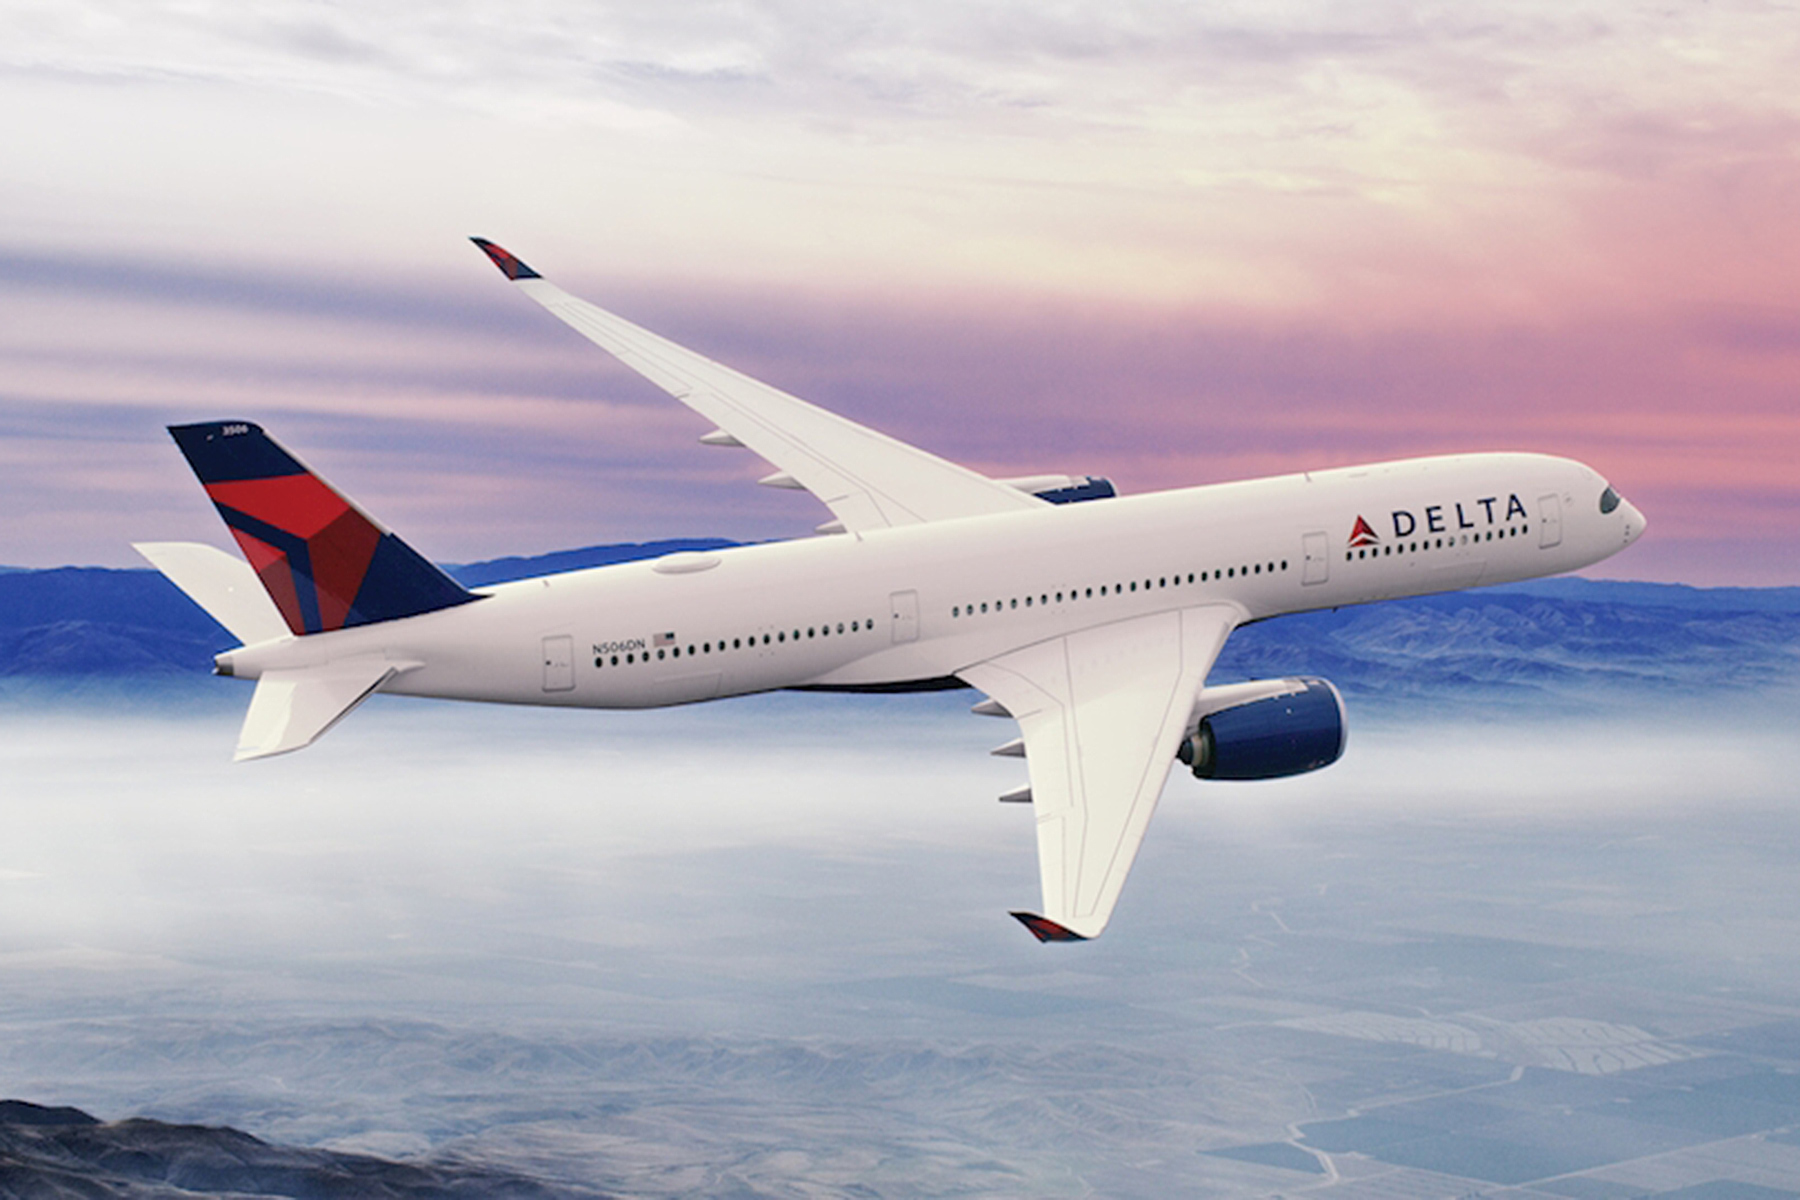 AirFleetRating provides Delta Airlines Reviews which help you understand the review of Seat Comfort and Legroom, Safety, Customer Satisfaction, Value for money, Cleanliness and other visit on our site for delta airline review.